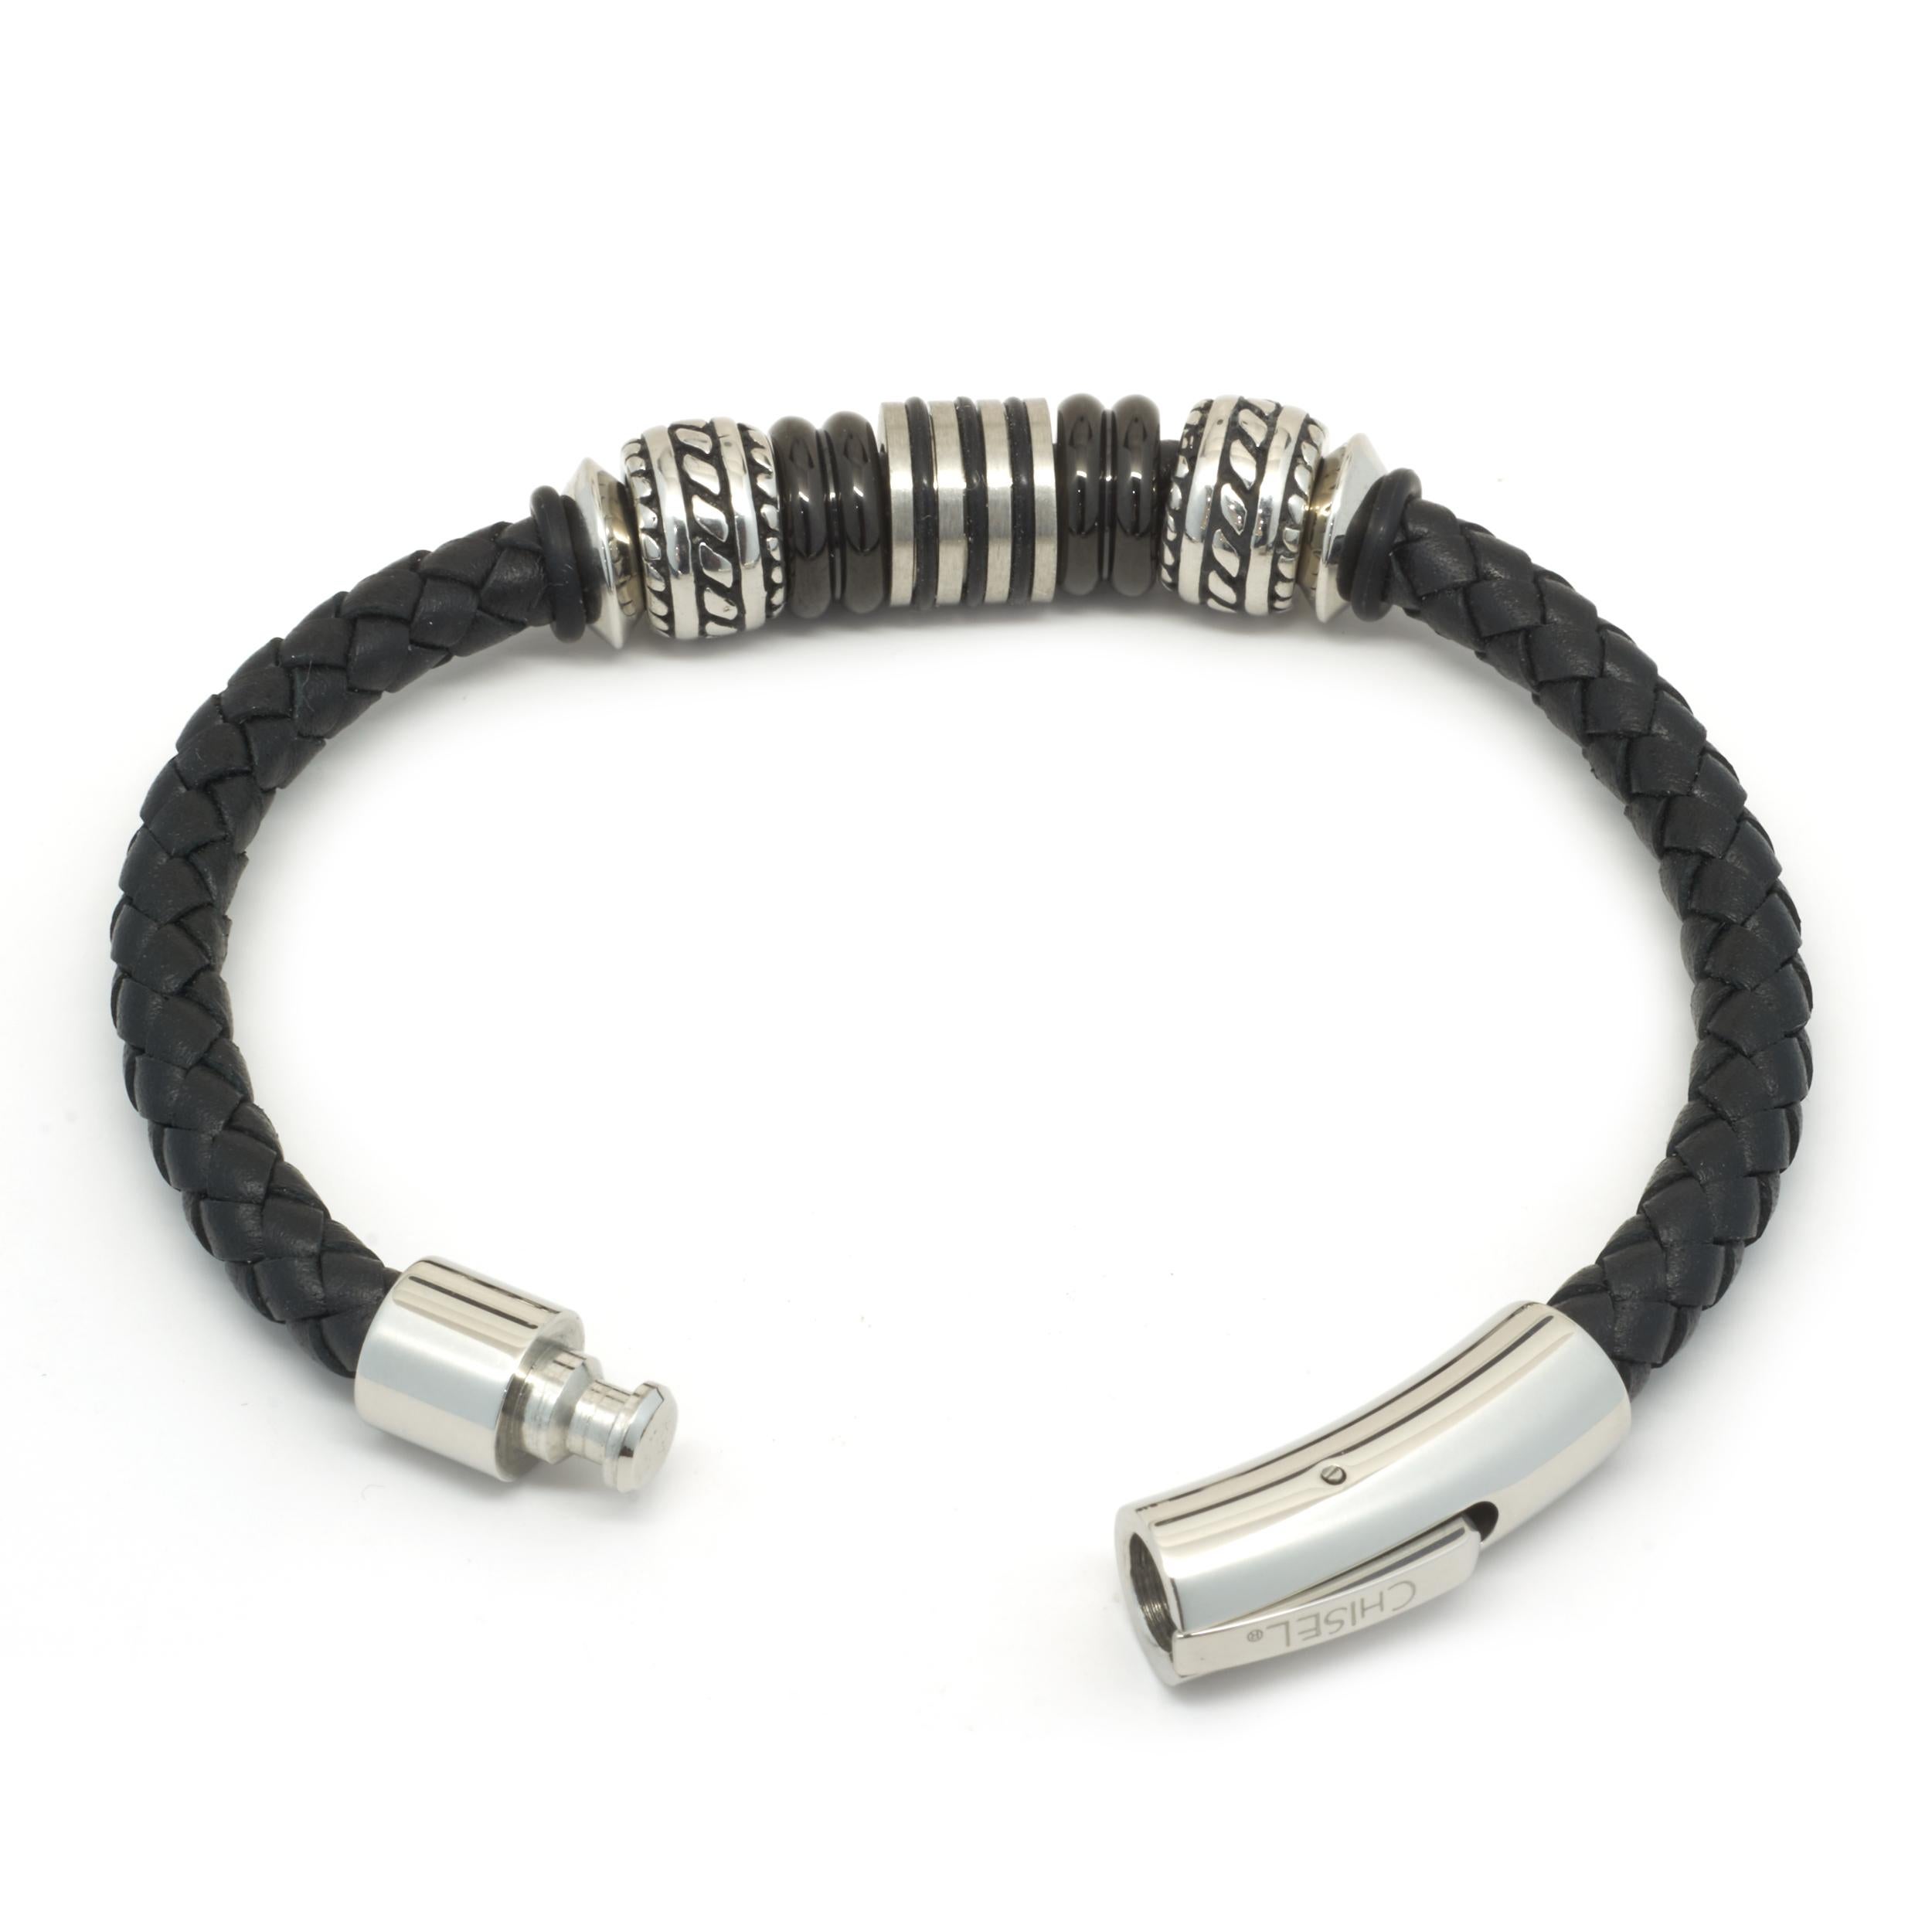 Leather Bracelet with Sterling Silver Stations In Excellent Condition For Sale In Scottsdale, AZ